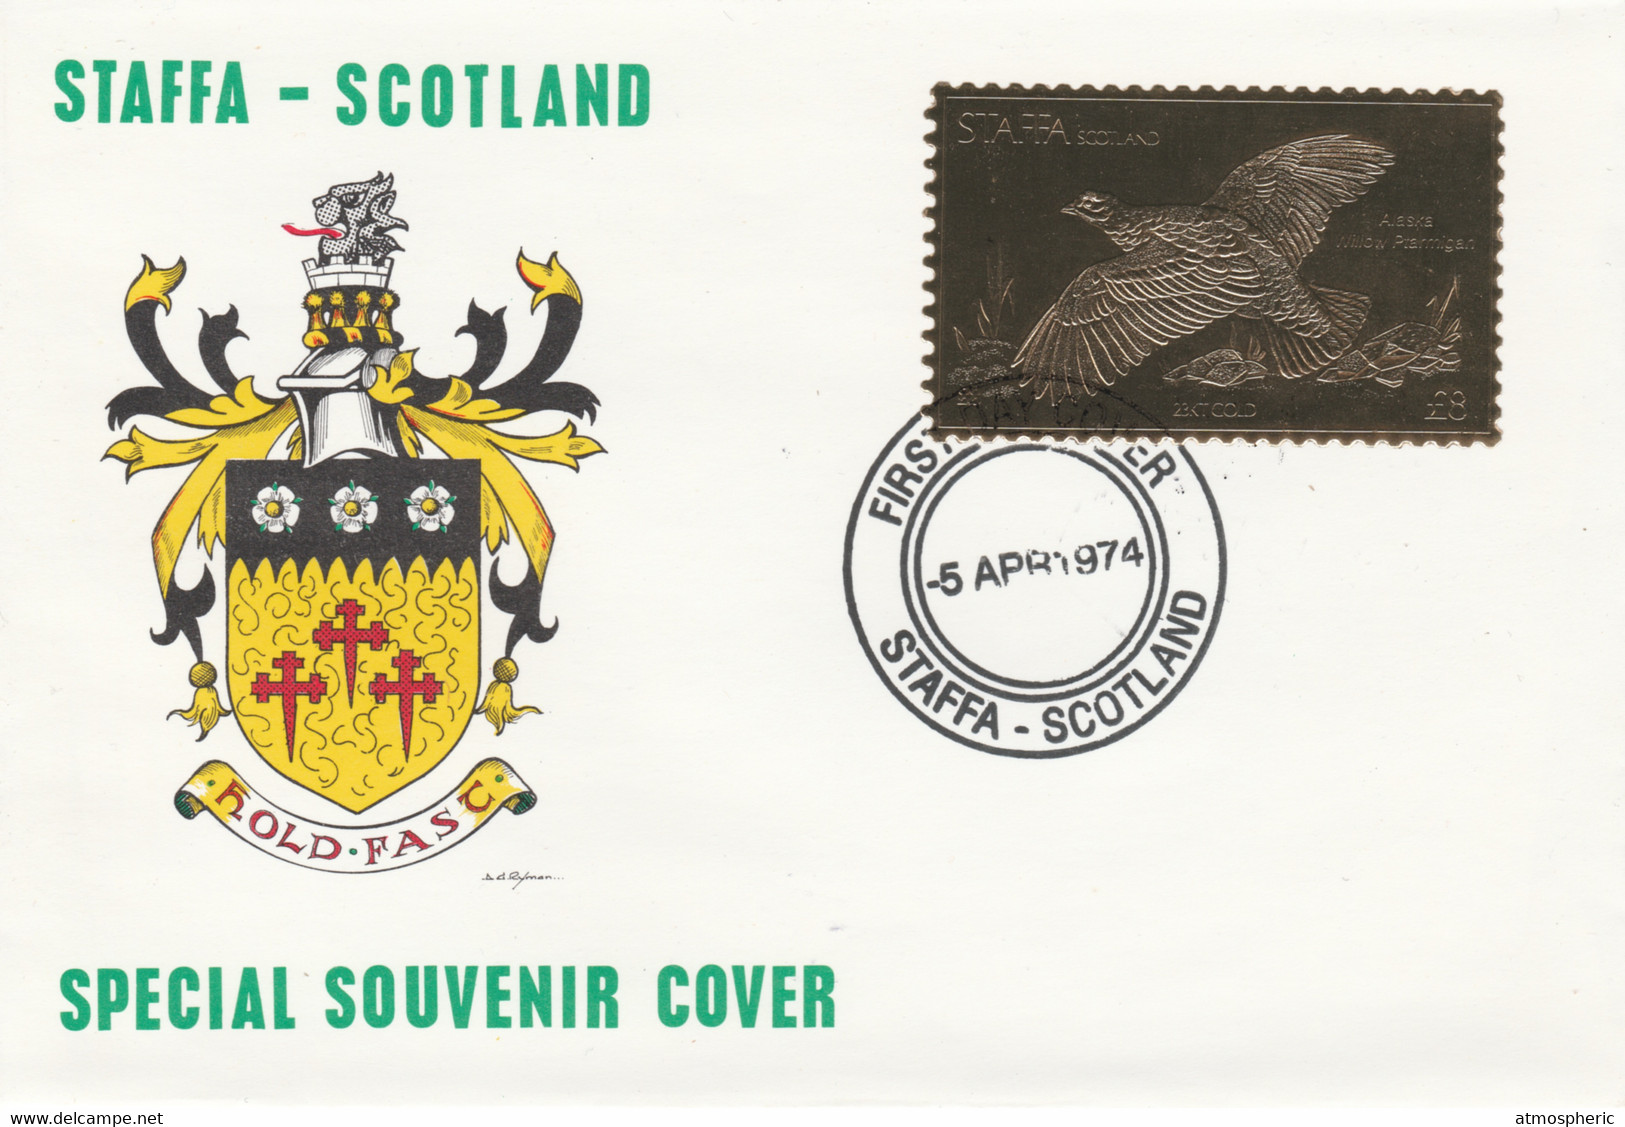 Staffa 1976 Alaska Willow Ptarmigan (Female) £8 Value Perforated & Embossed In 23 Carat Gold Foil On Souvenir Cover With - Local Issues